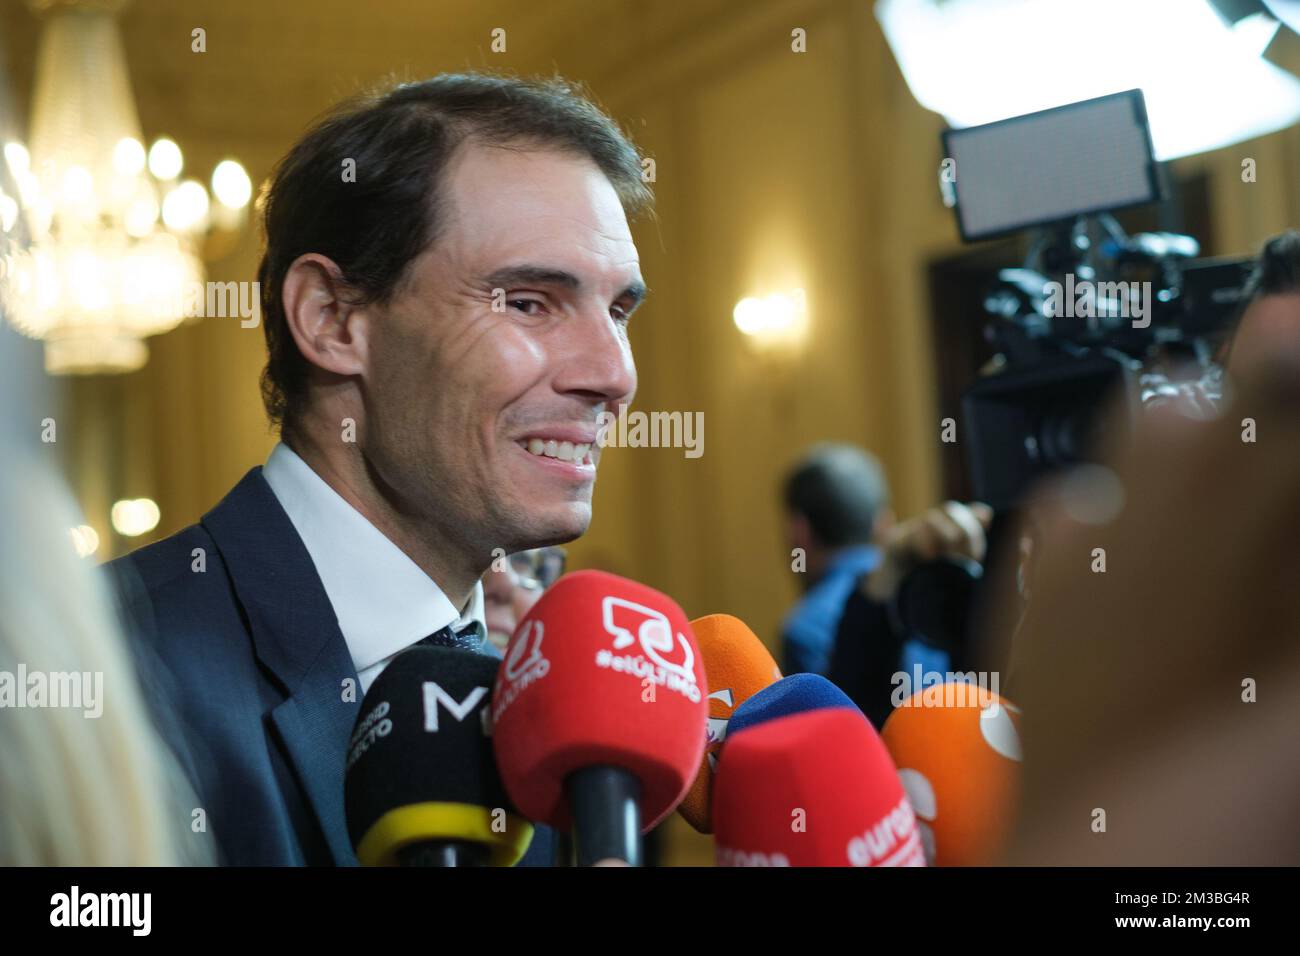 Madrid, Spain. 14th Dec, 2022. Rafael Nadal (Rafa Nadal) attends the photocall of the V Edition of the Esquire Man of the Year Awards at the Casino de Madrid. (Photo by Atilano Garcia/SOPA Images/Sipa USA) Credit: Sipa USA/Alamy Live News Stock Photo